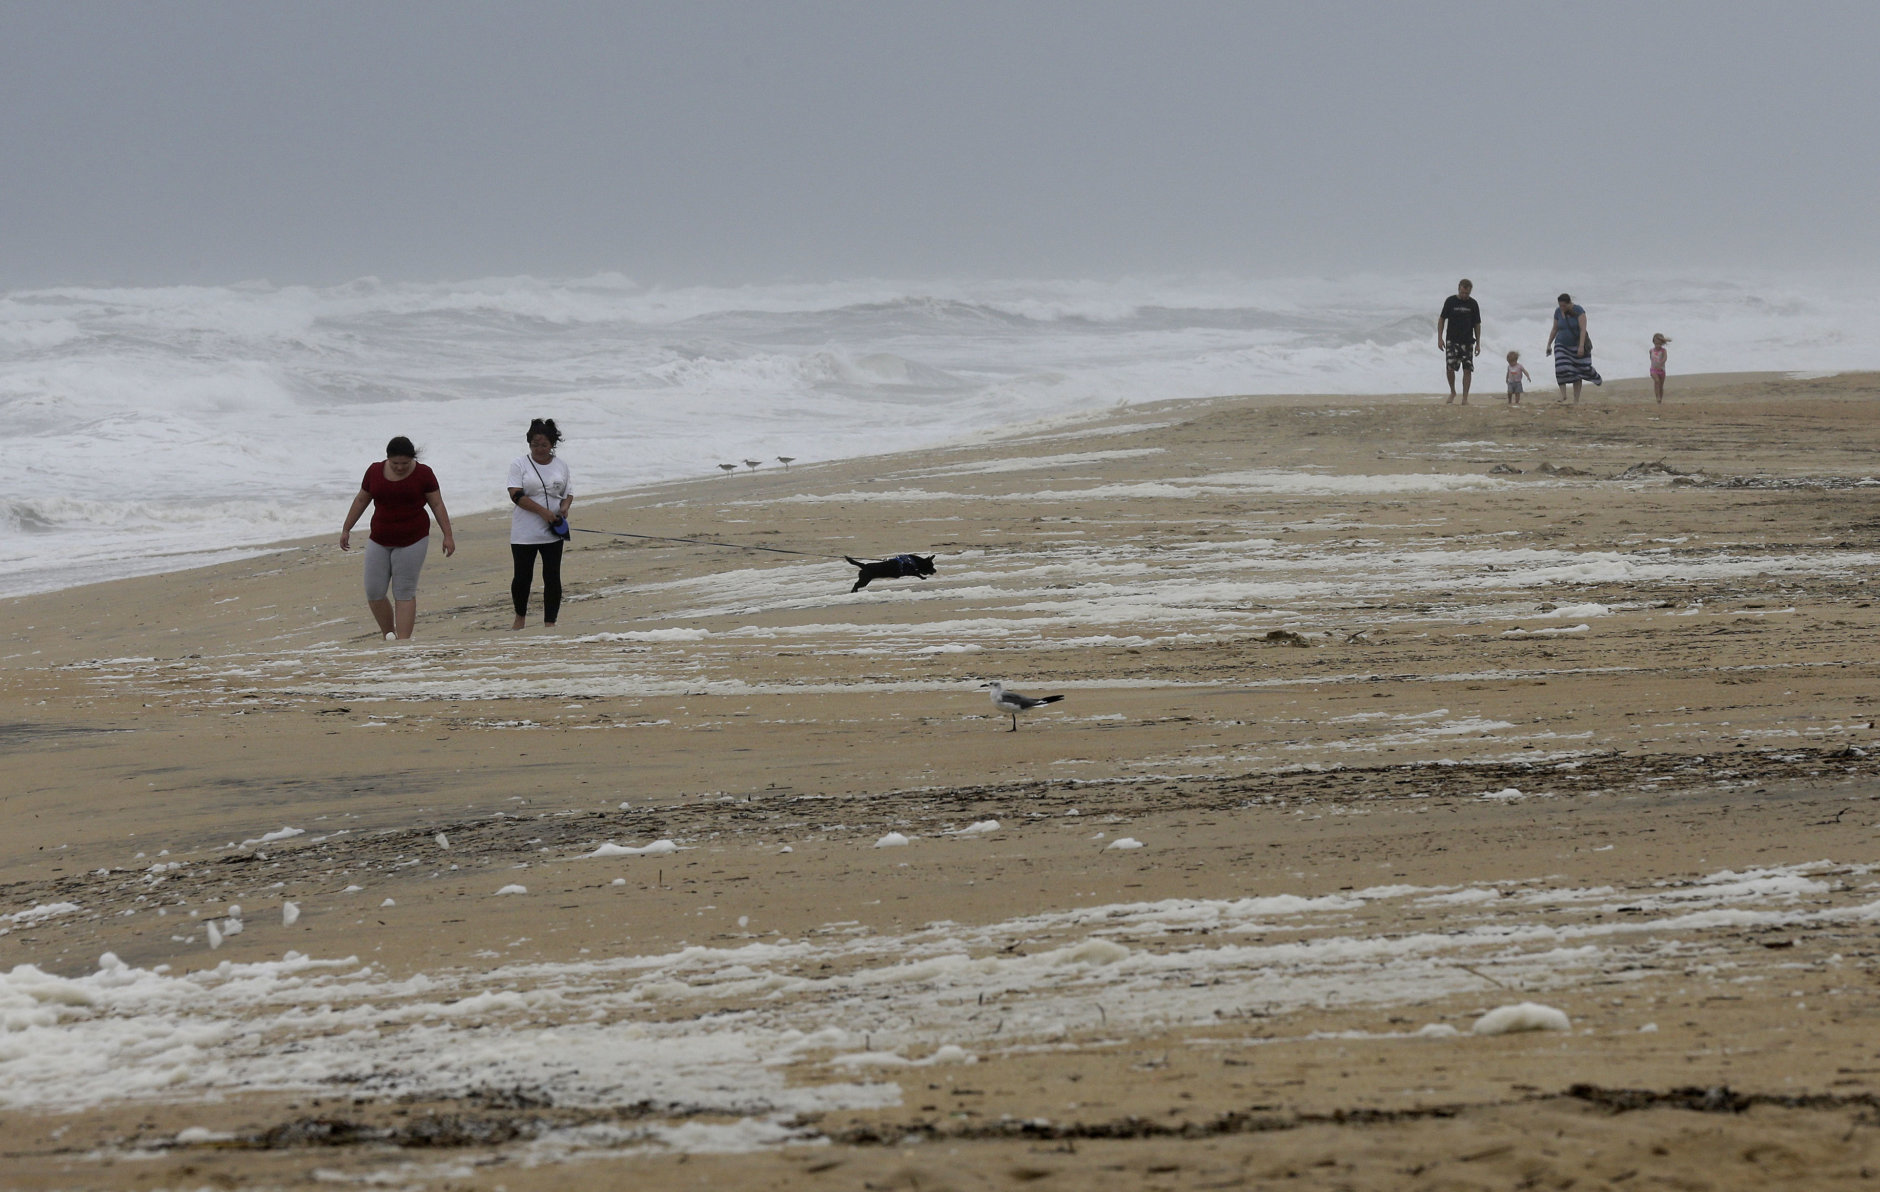 People walk the beach in Kill Devil Hills, N.C., Thursday, Sept. 13, 2018 as Hurricane Florence approaches the east coast. (AP Photo/Gerry Broome)